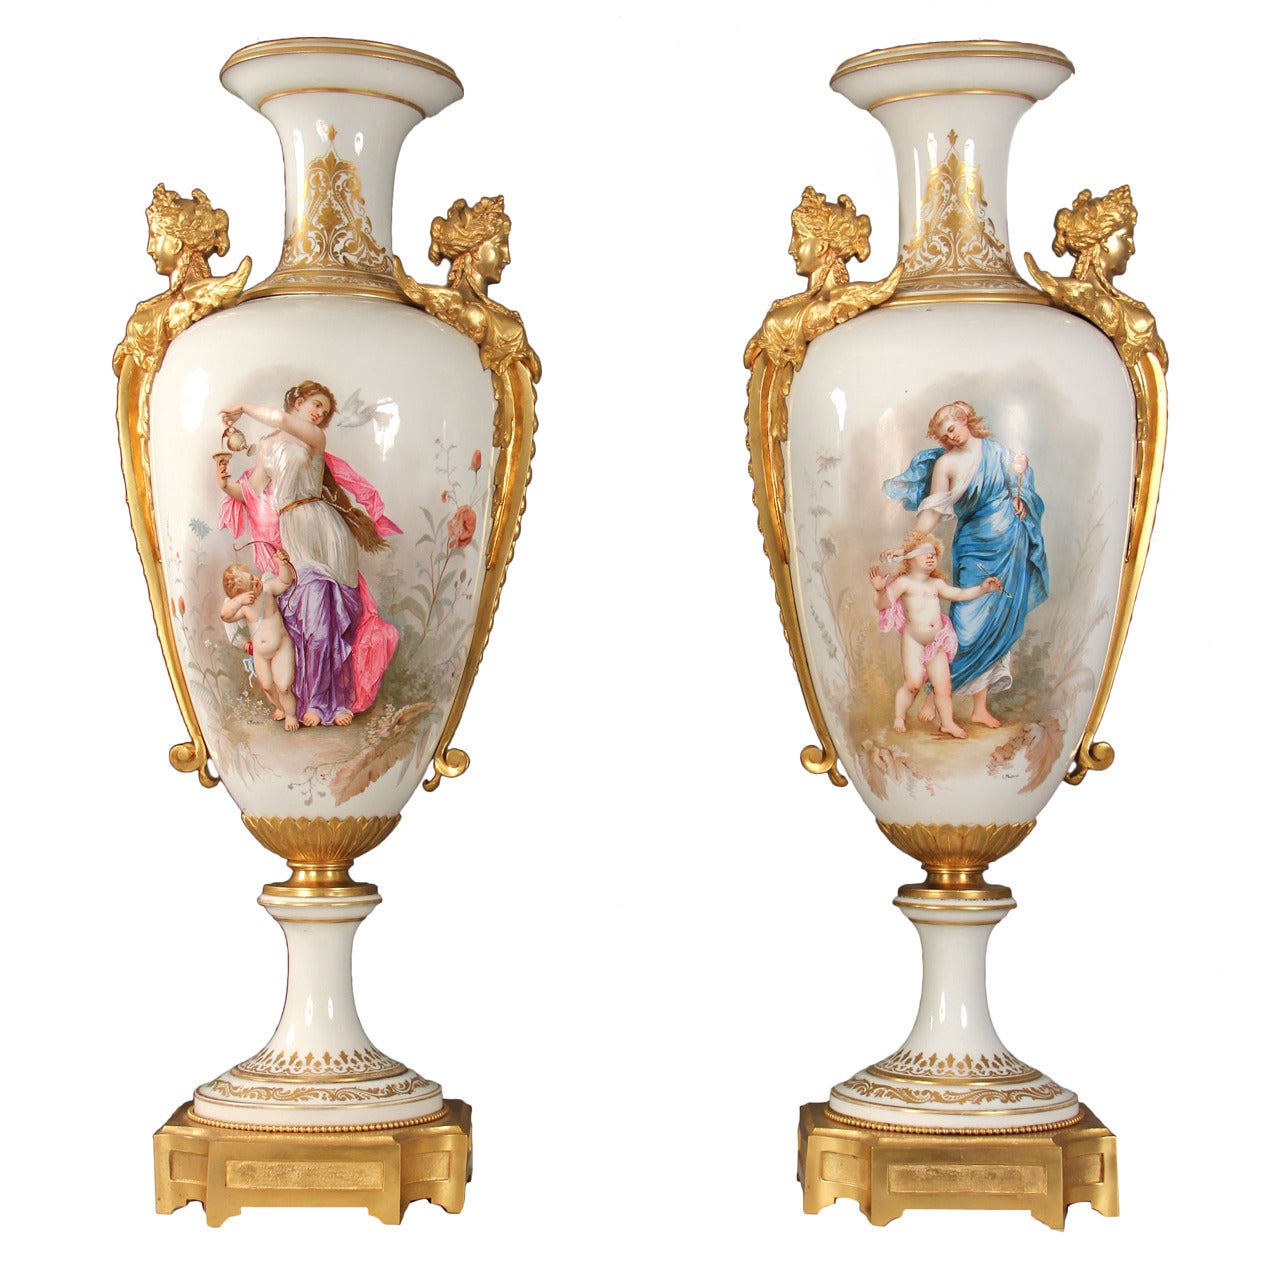 A Rare Pair of Late 19th Century Gilt Bronze Mounted White Sèvres Style Vases